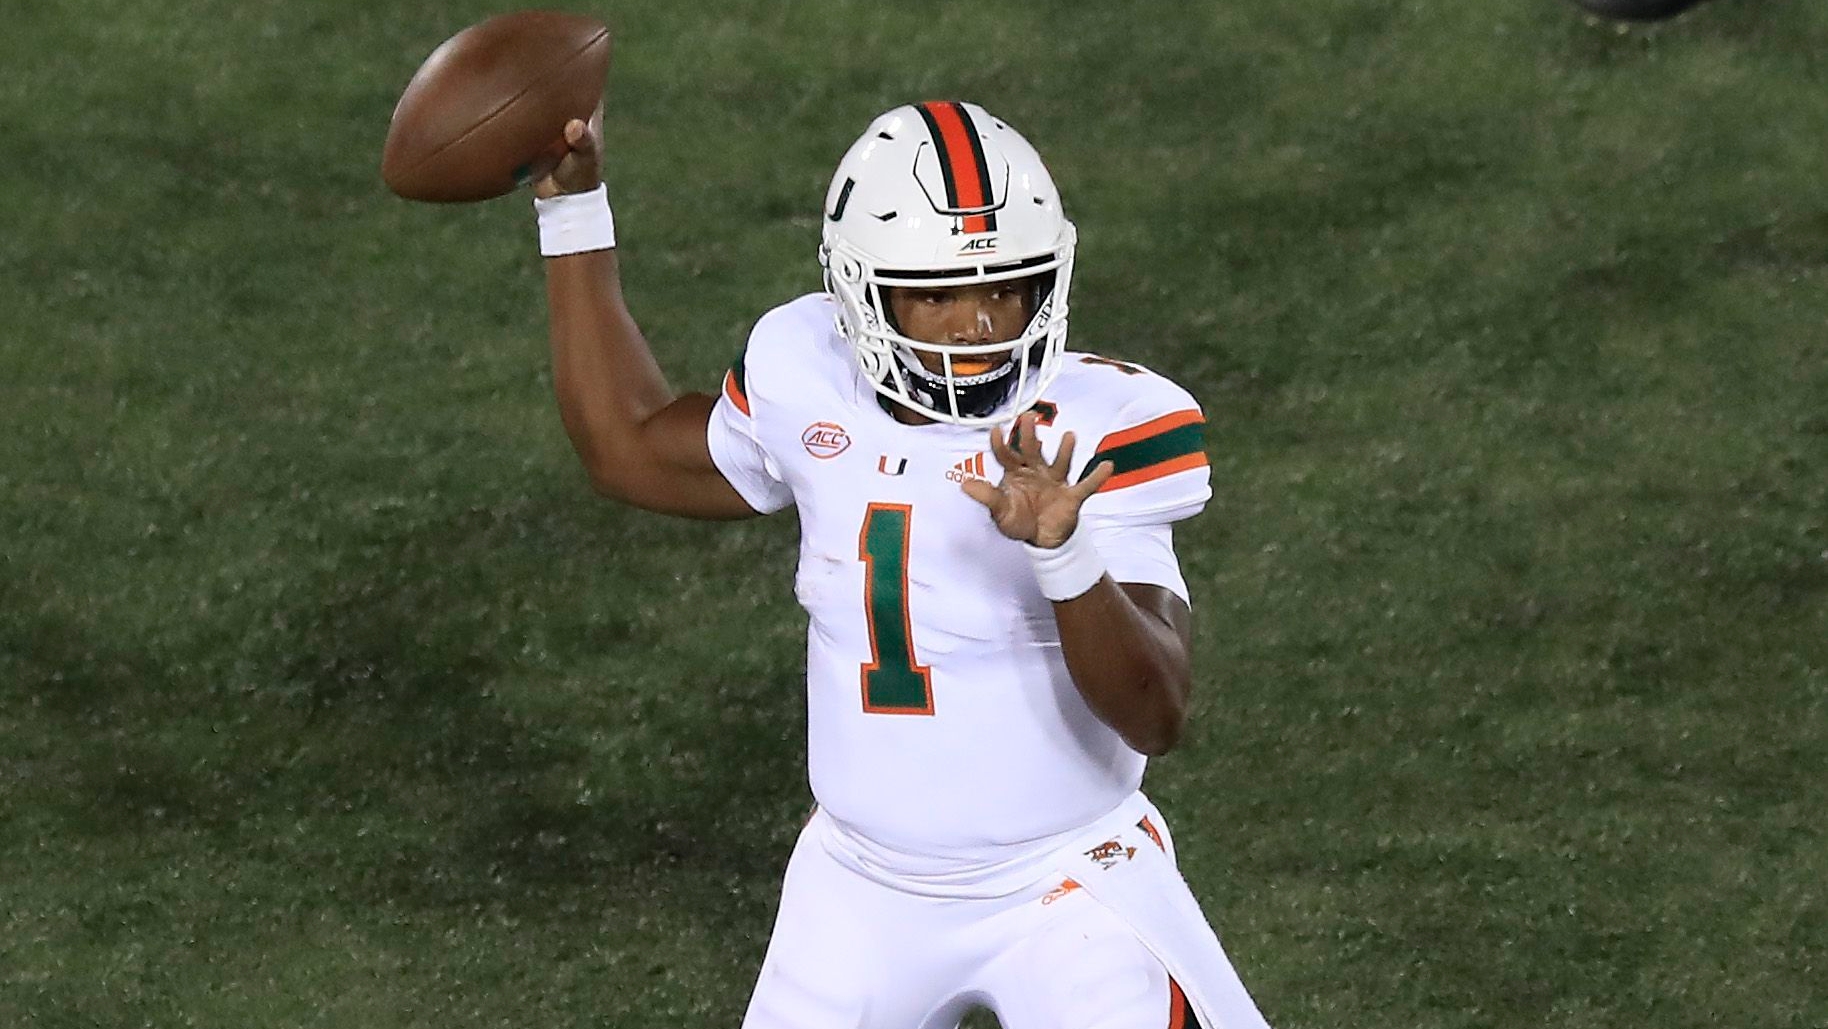 King leads Miami with three TD passes in win over Louisville